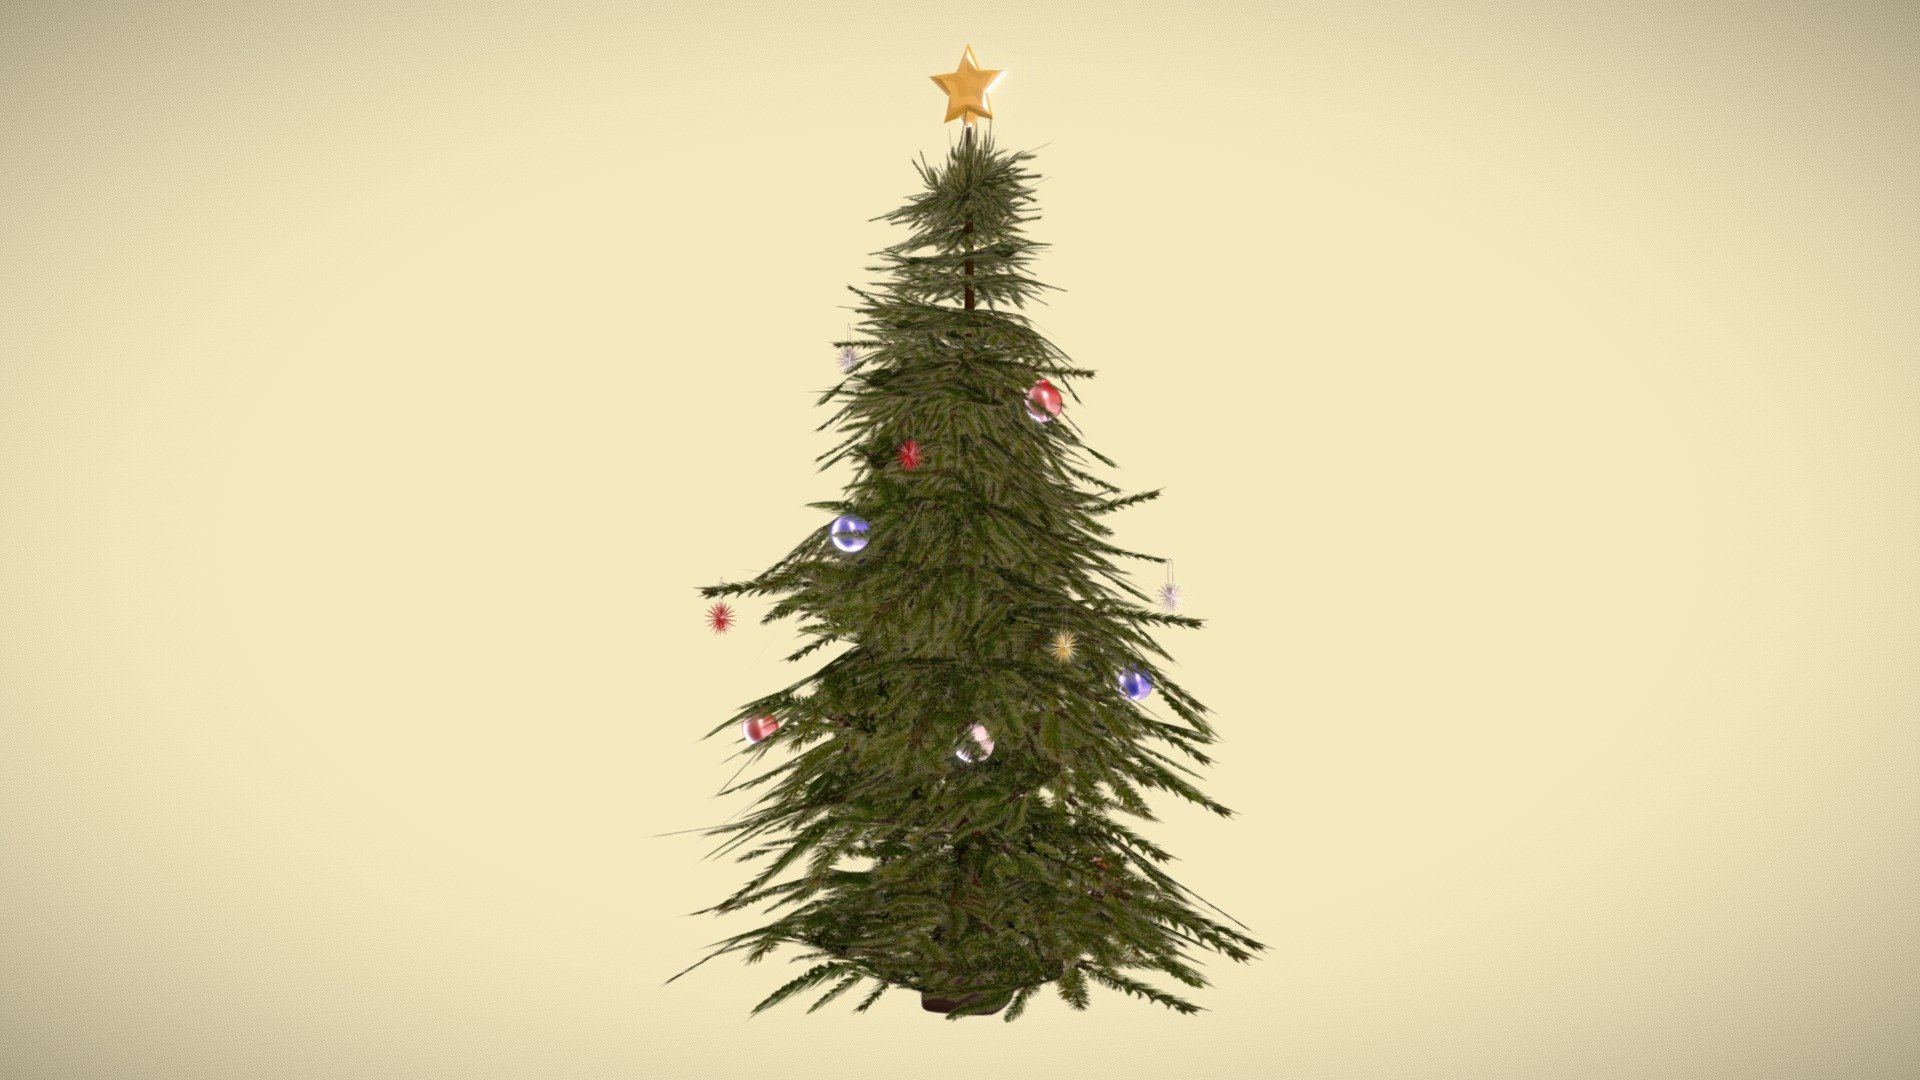 Christmas Tree Ready to use.

Click on the link to see more models : https://sketchfab.com/GbehnamG/store

If you need customized 3d models , feel free to contact at: mr.gbehnamg@yahoo.com - Christmas Tree - Buy Royalty Free 3D model by BehNaM (@GbehnamG) 3d model